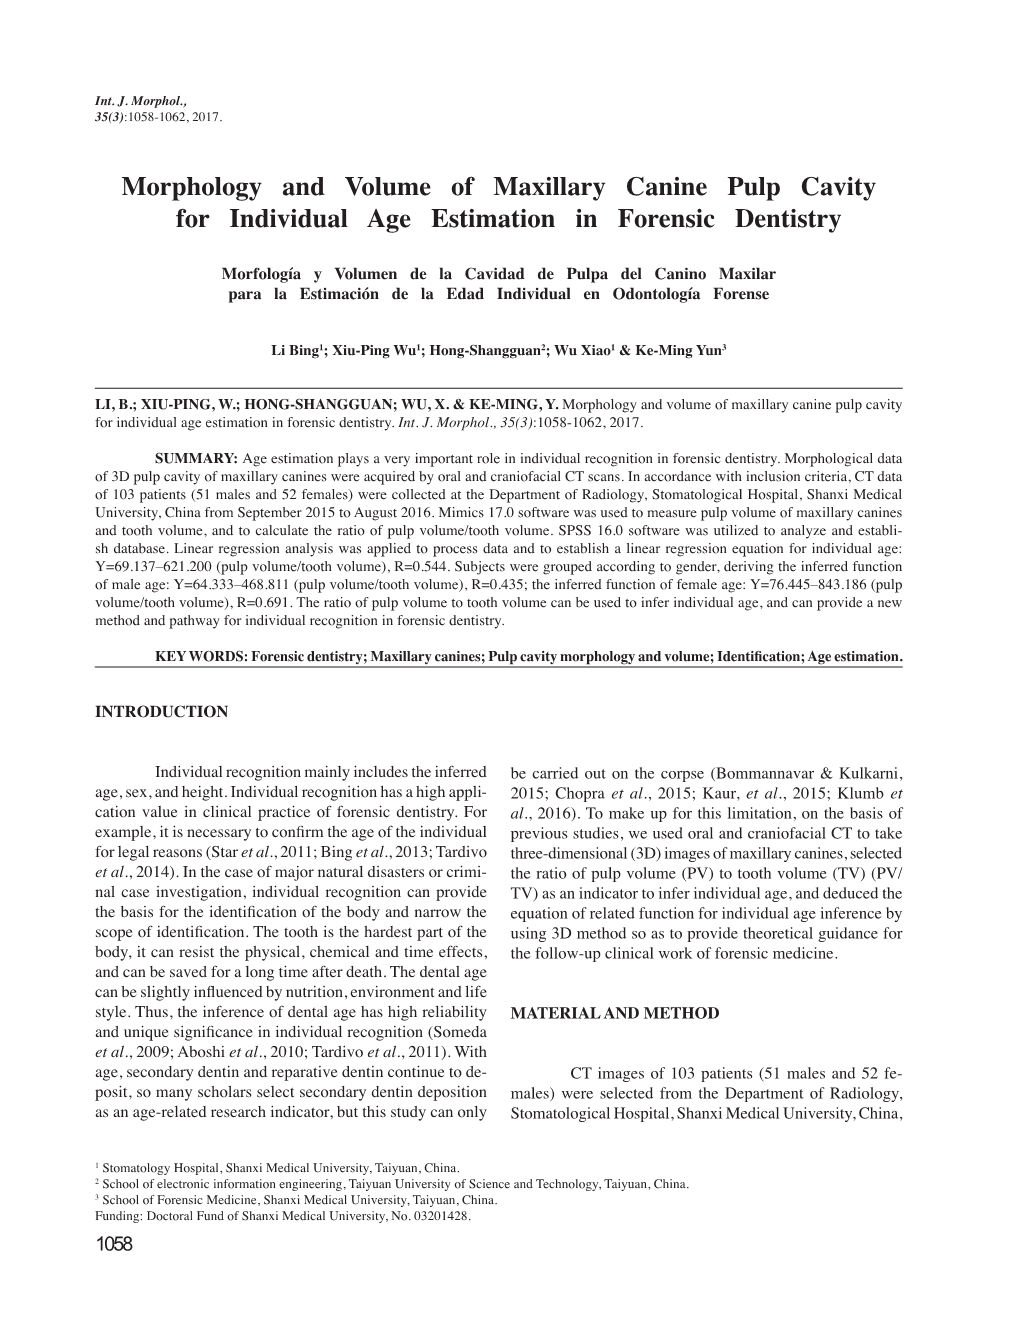 Morphology and Volume of Maxillary Canine Pulp Cavity for Individual Age Estimation in Forensic Dentistry